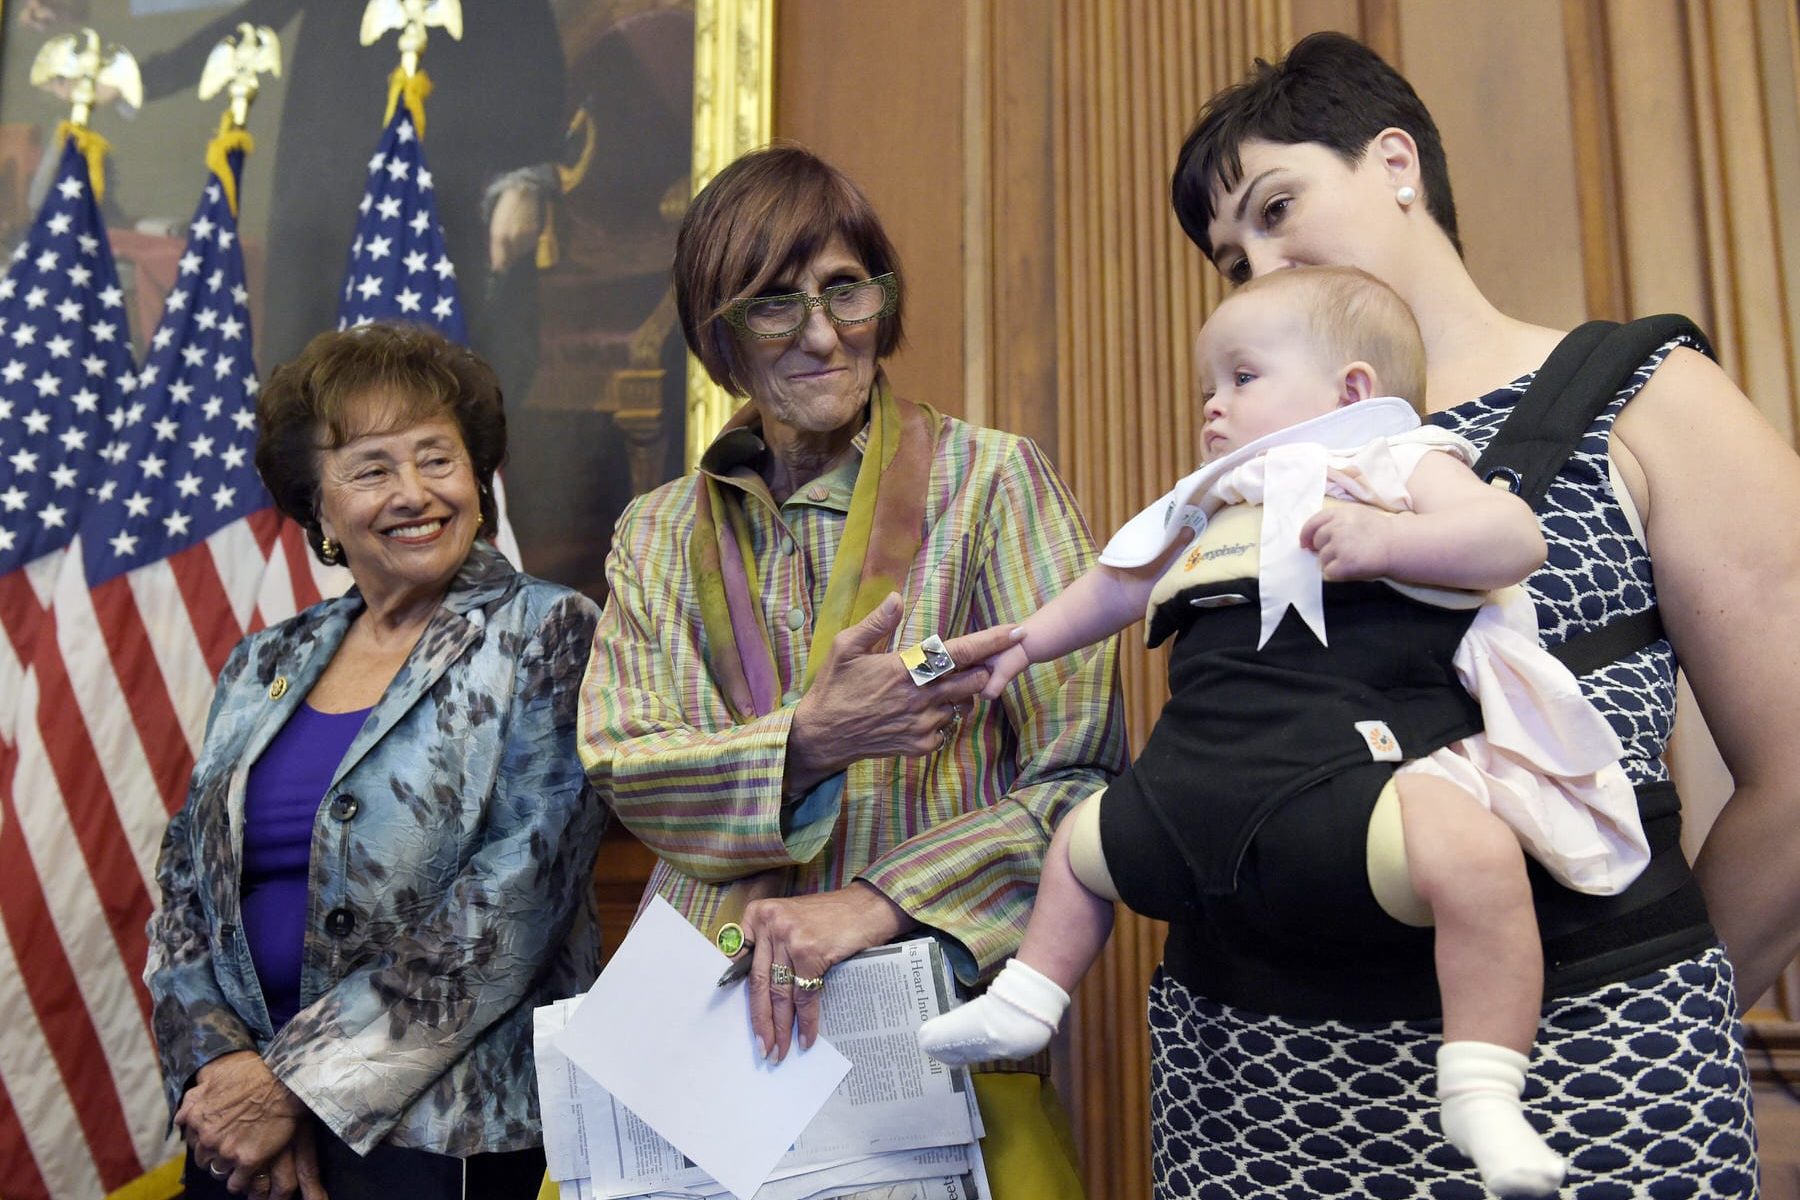 An image of Rep. Rosa DeLauro, D-N.Y. holding a baby's hand at a press conference., during a news conference.